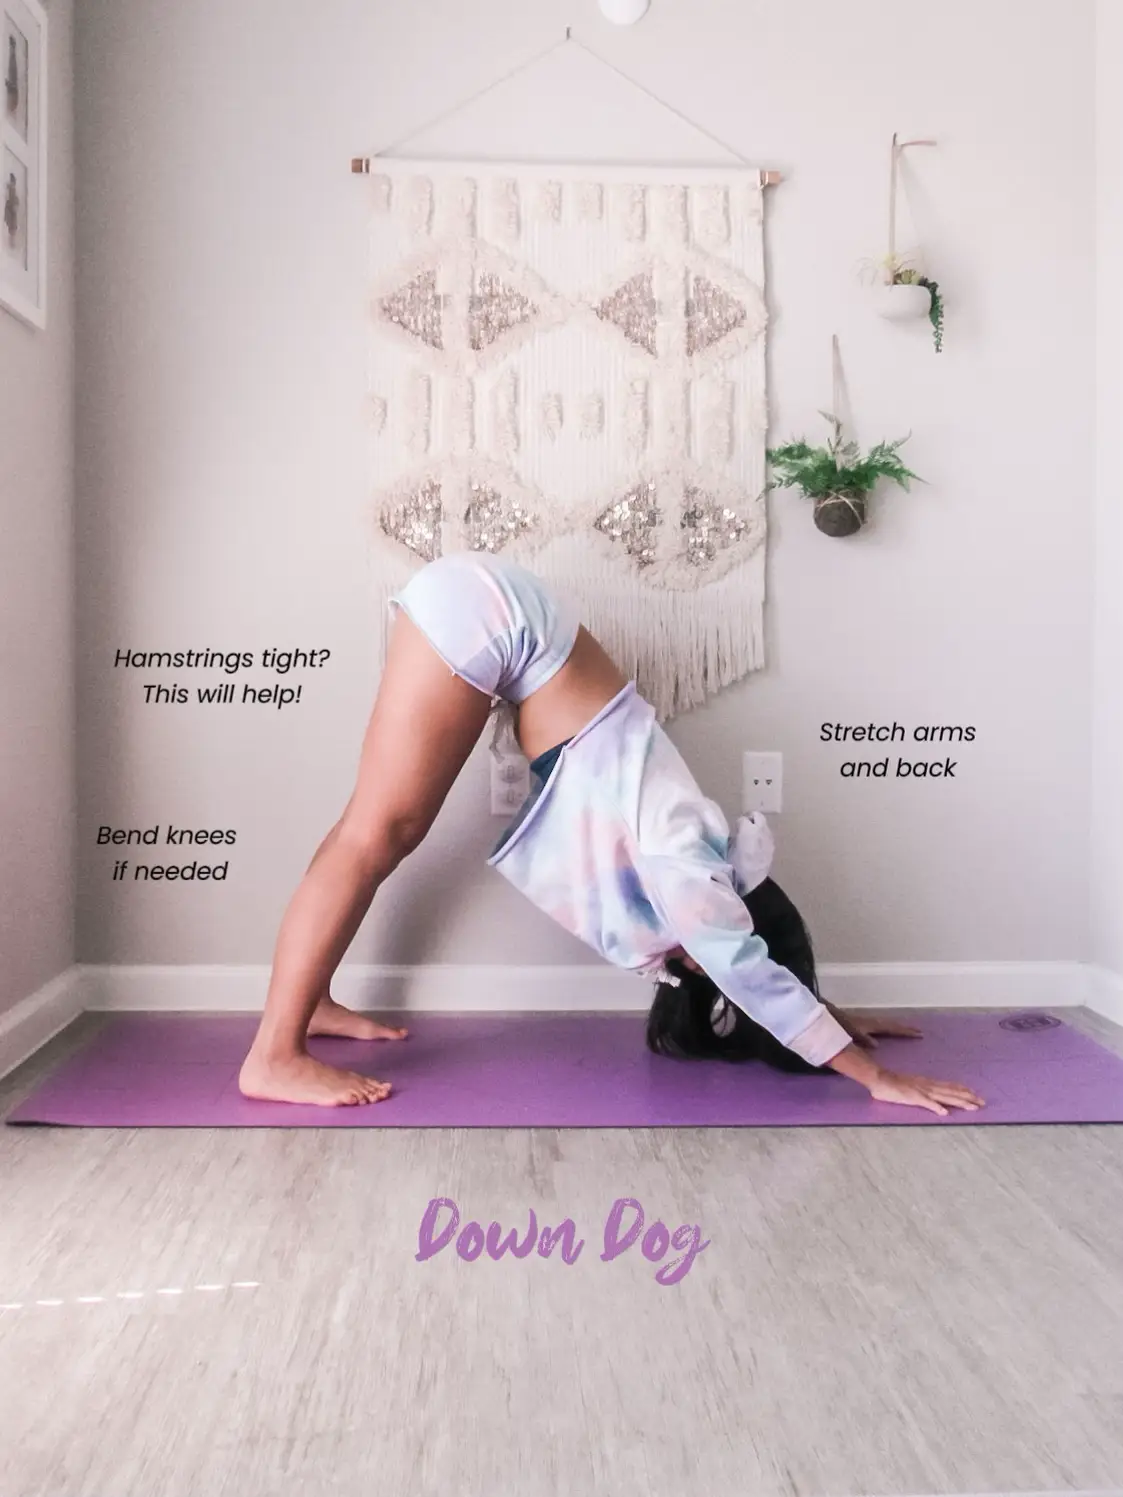 Stretch your spine, Gallery posted by yogawithrona